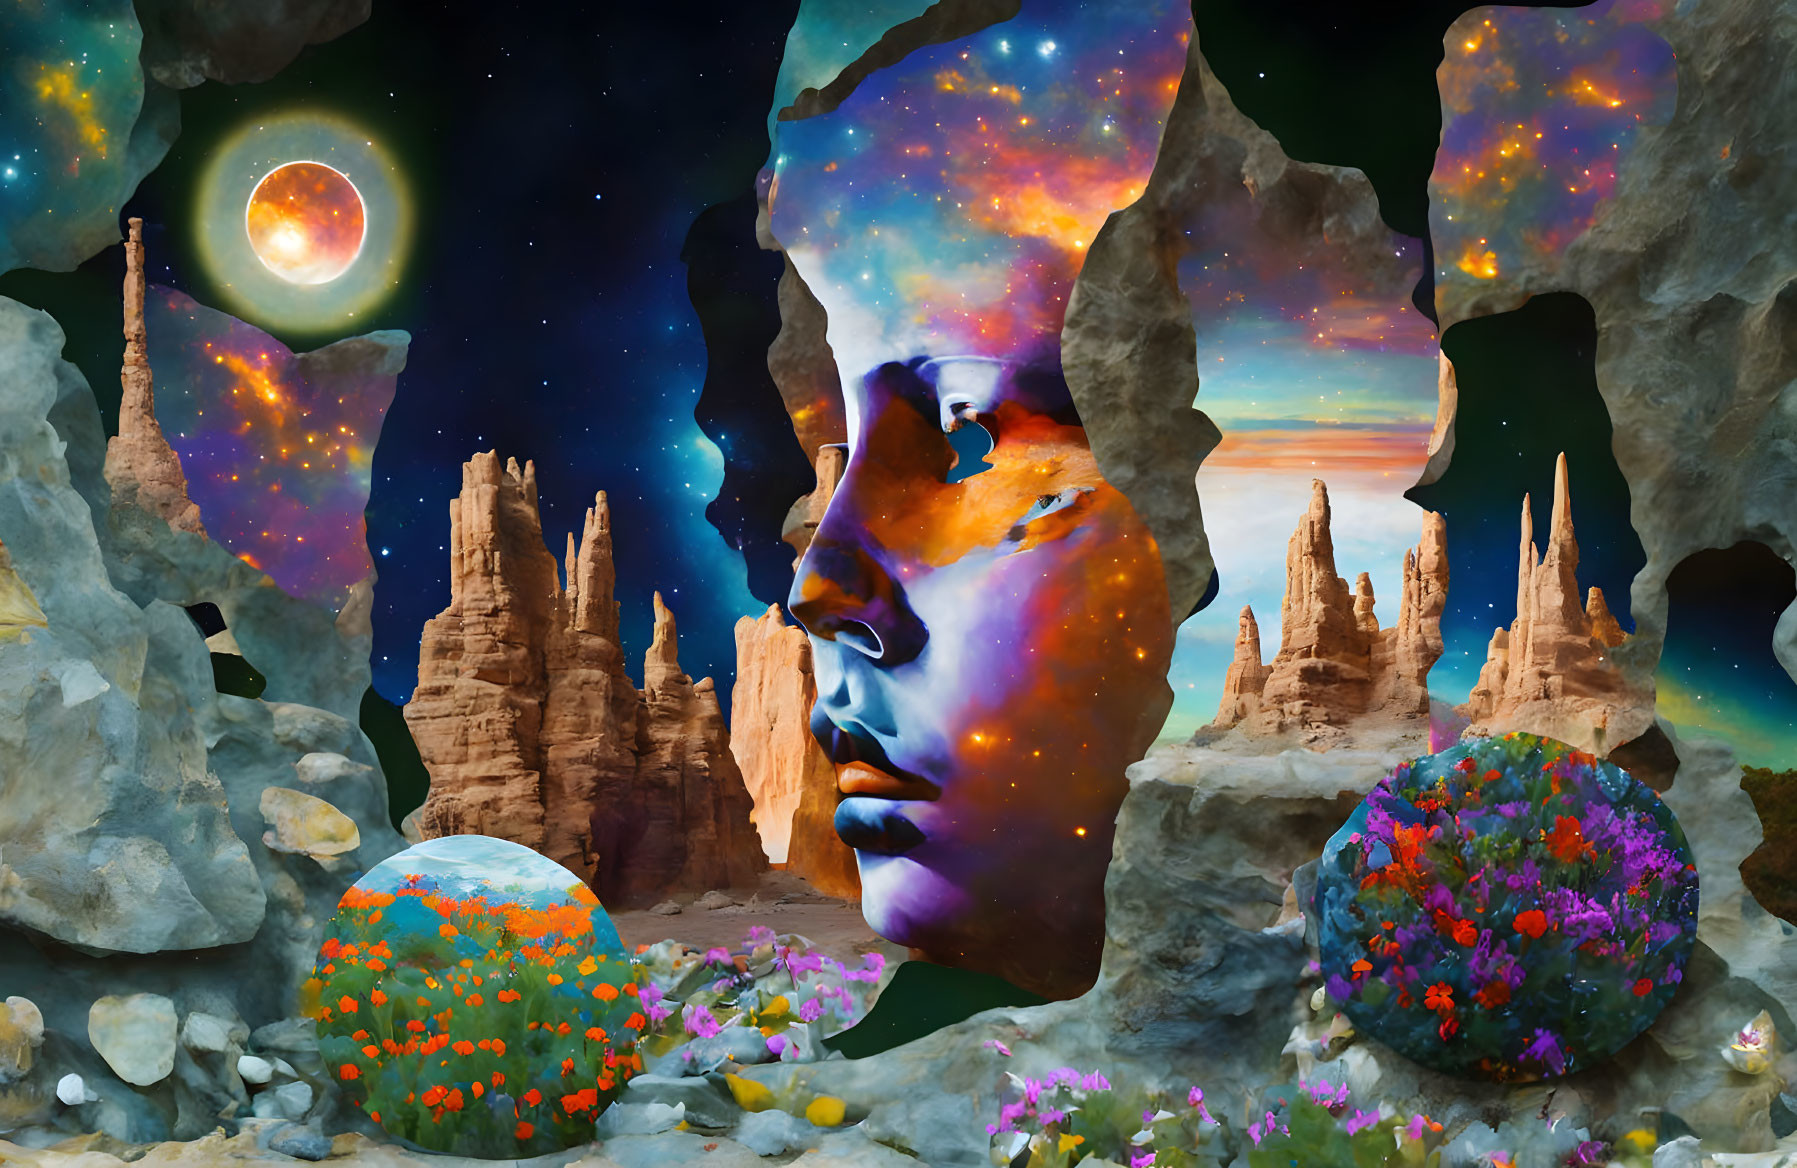 Surreal landscape with cosmic face, starry sky, rock formations, colorful foliage.